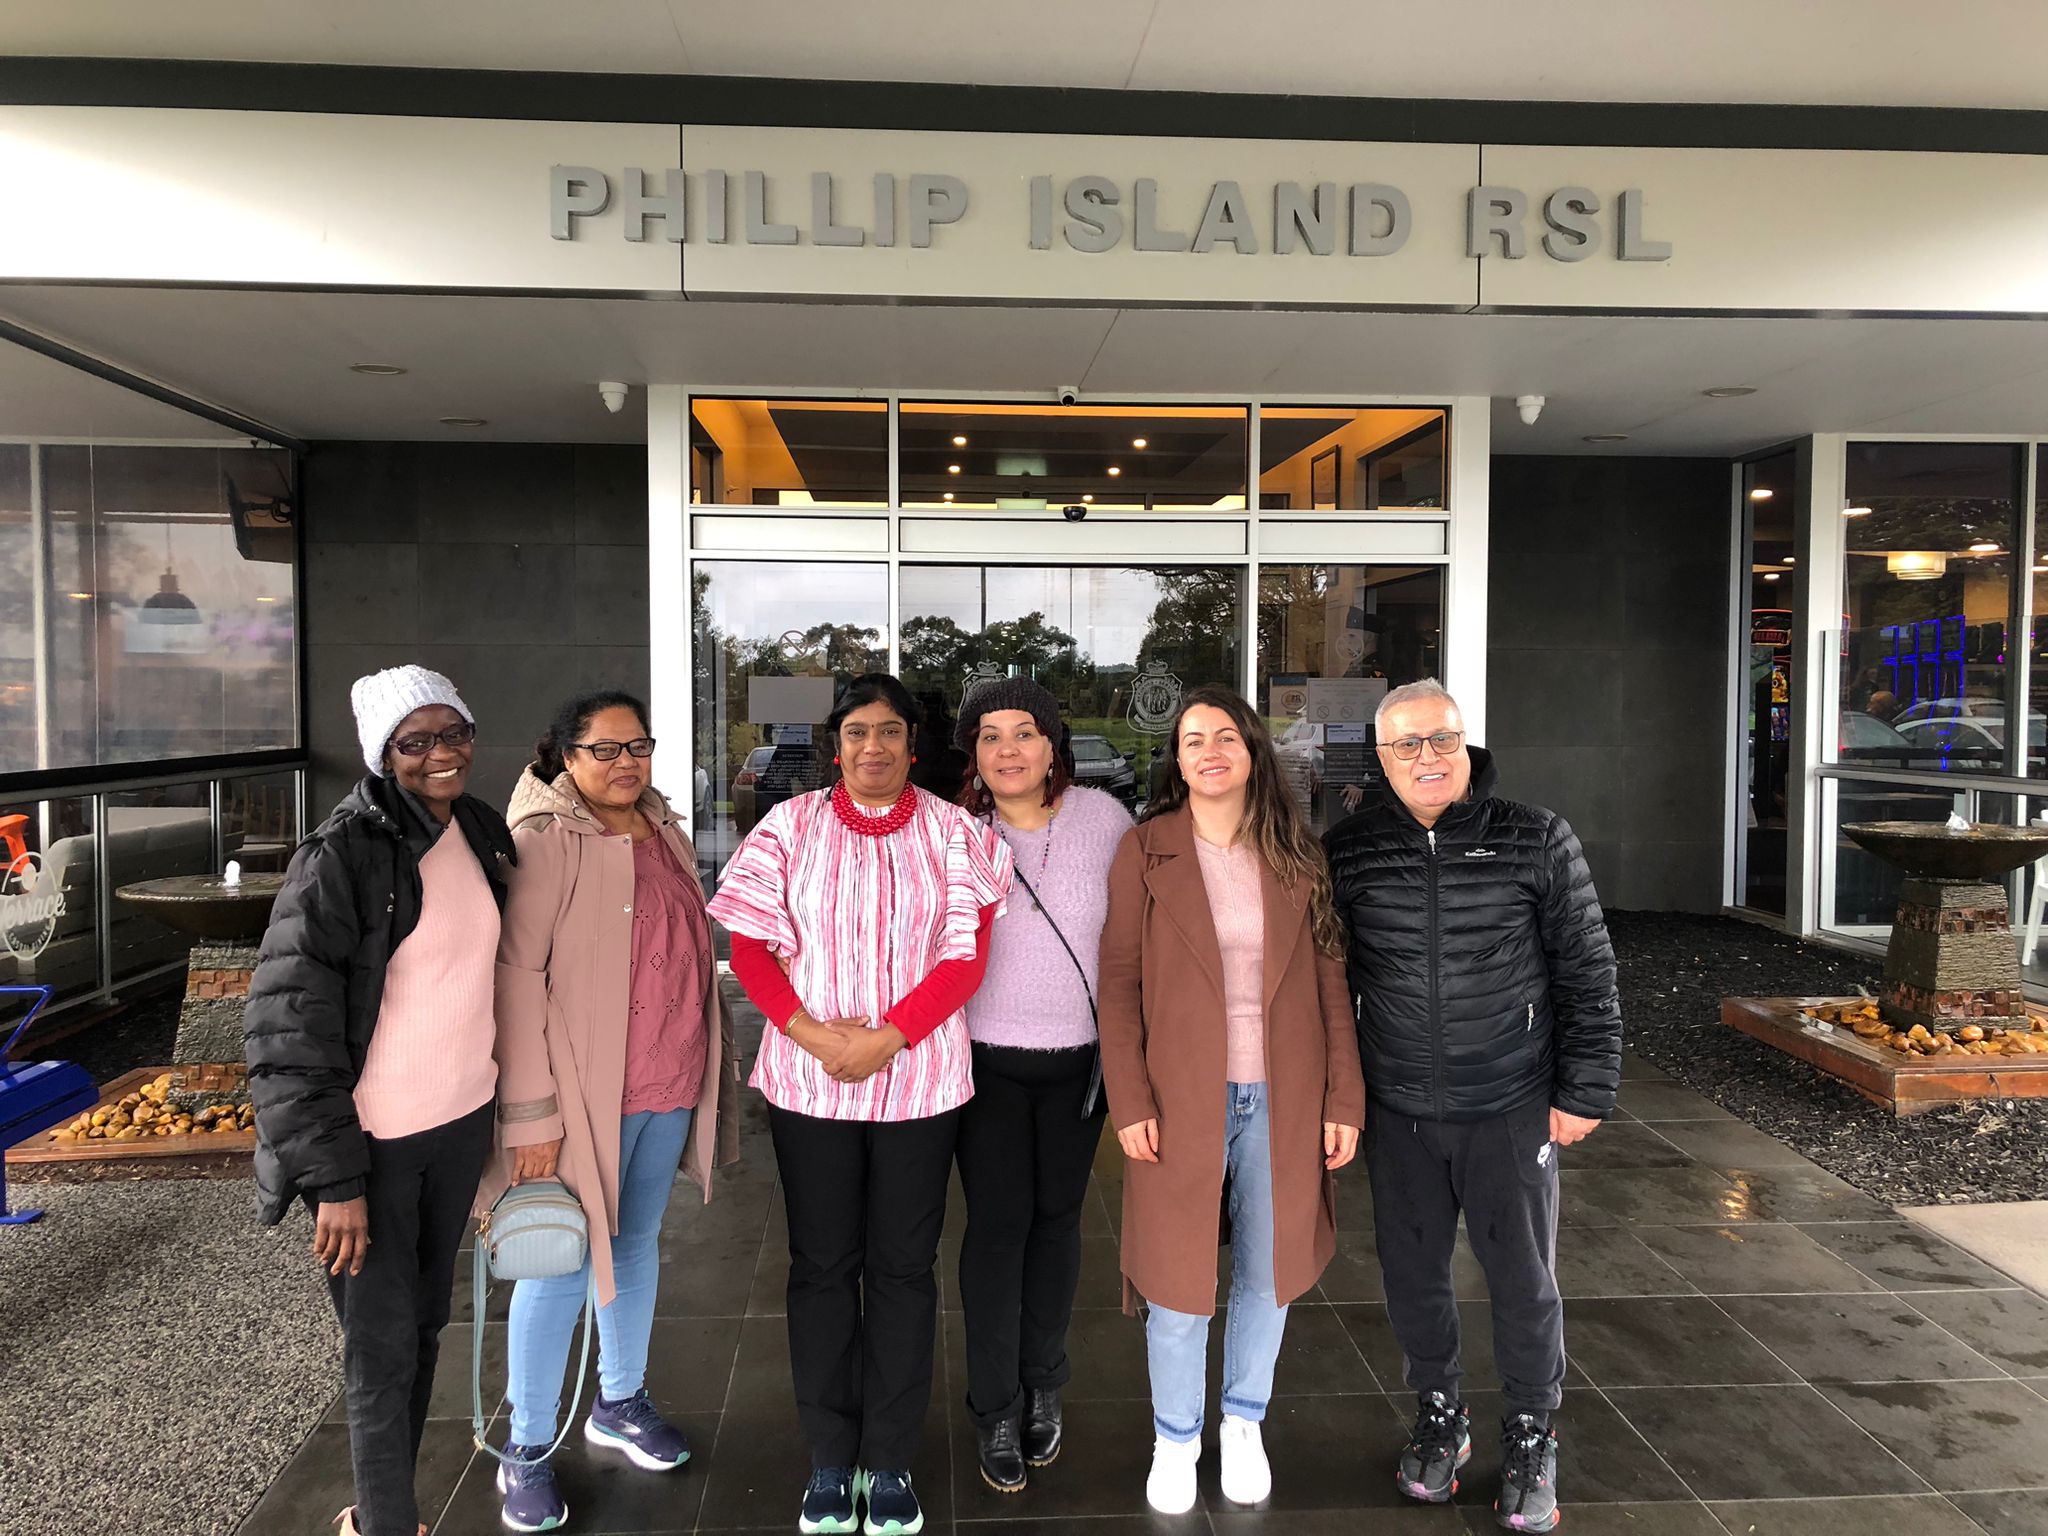 The group stands out the front of the Philip Island RSL with big smiles on their faces.